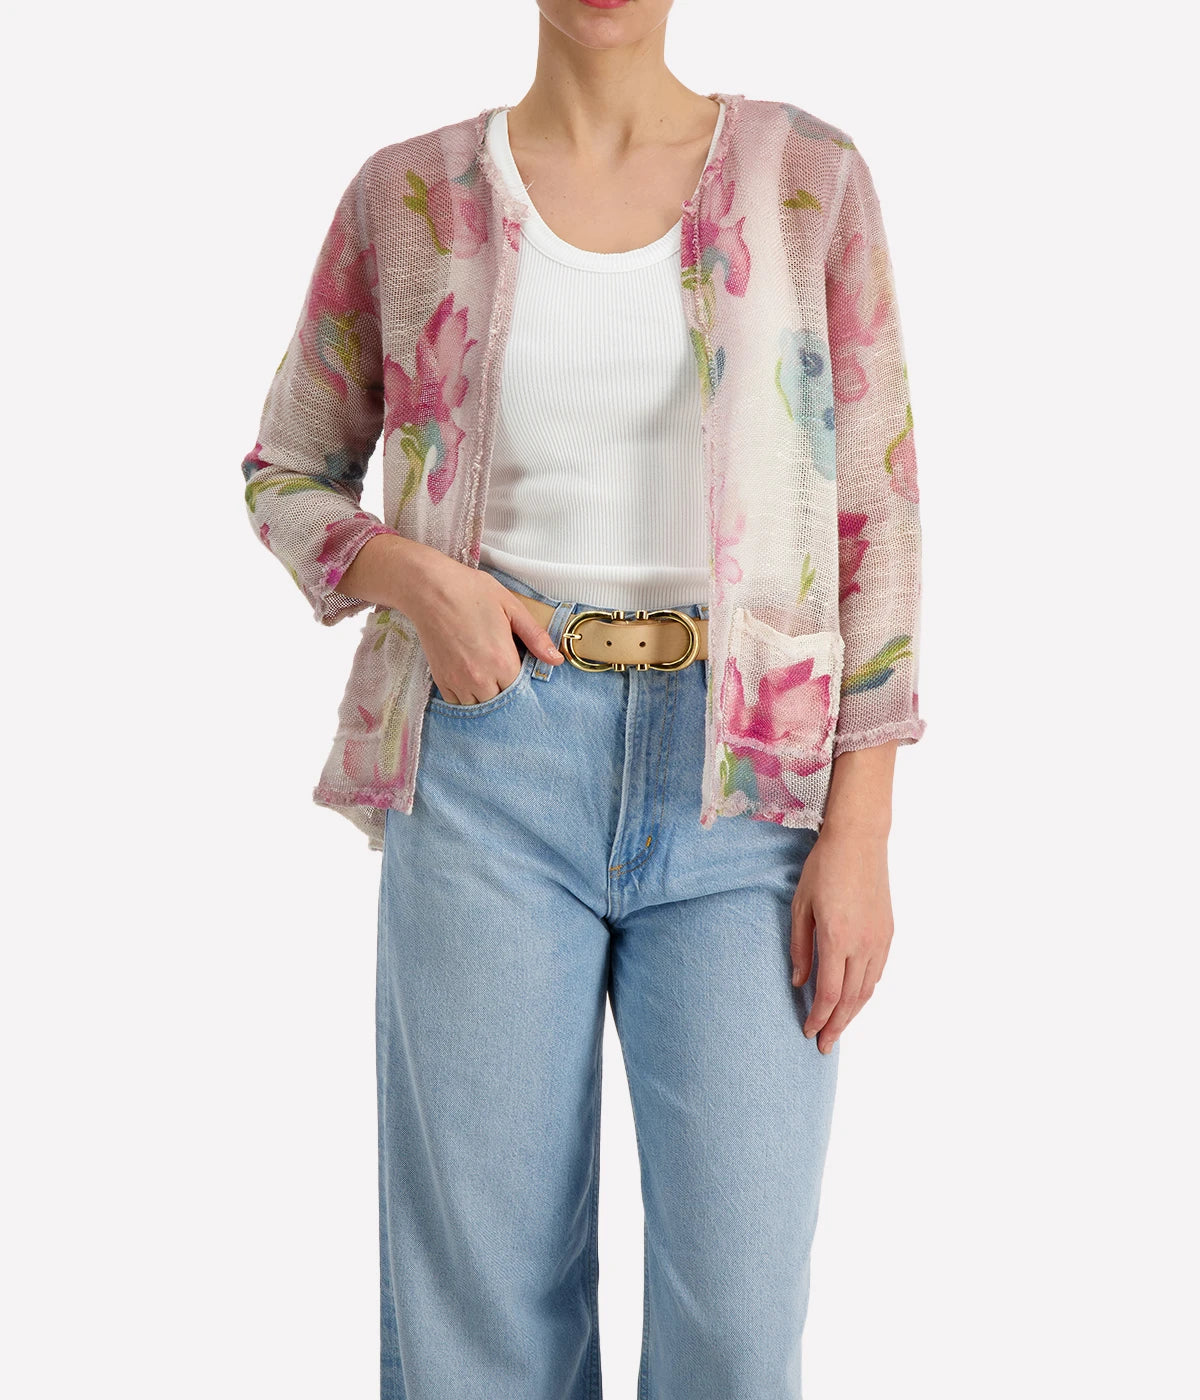 crew neck loose knit open jacket bty Avant toi. Pink linen & cotton blend with printed flowers.